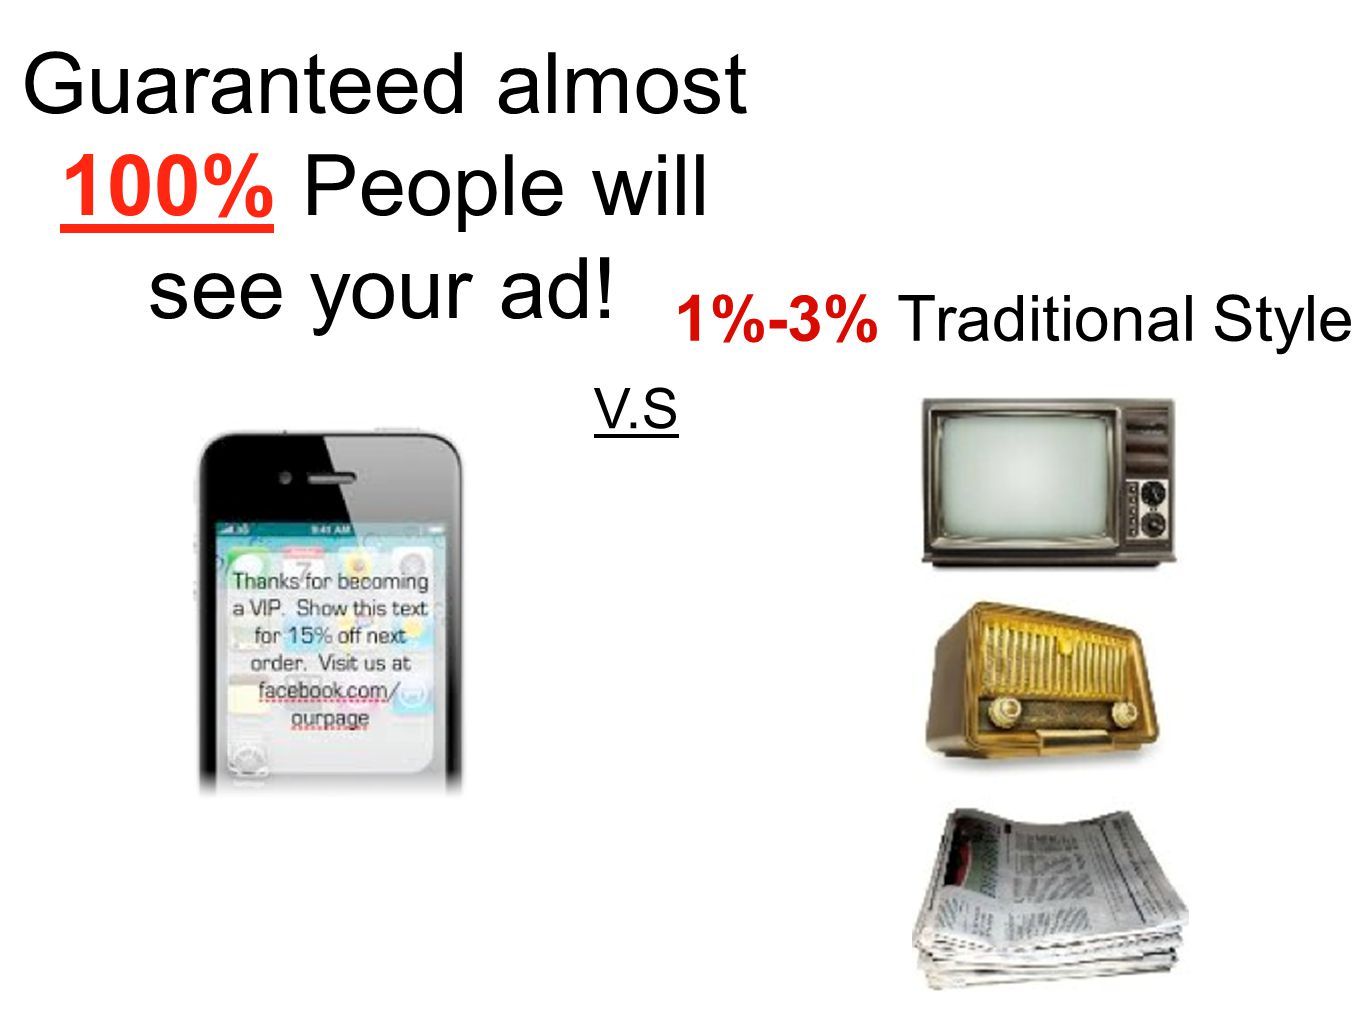 Guaranteed almost 100% People will see your ad! V.S 1%-3% Traditional Style